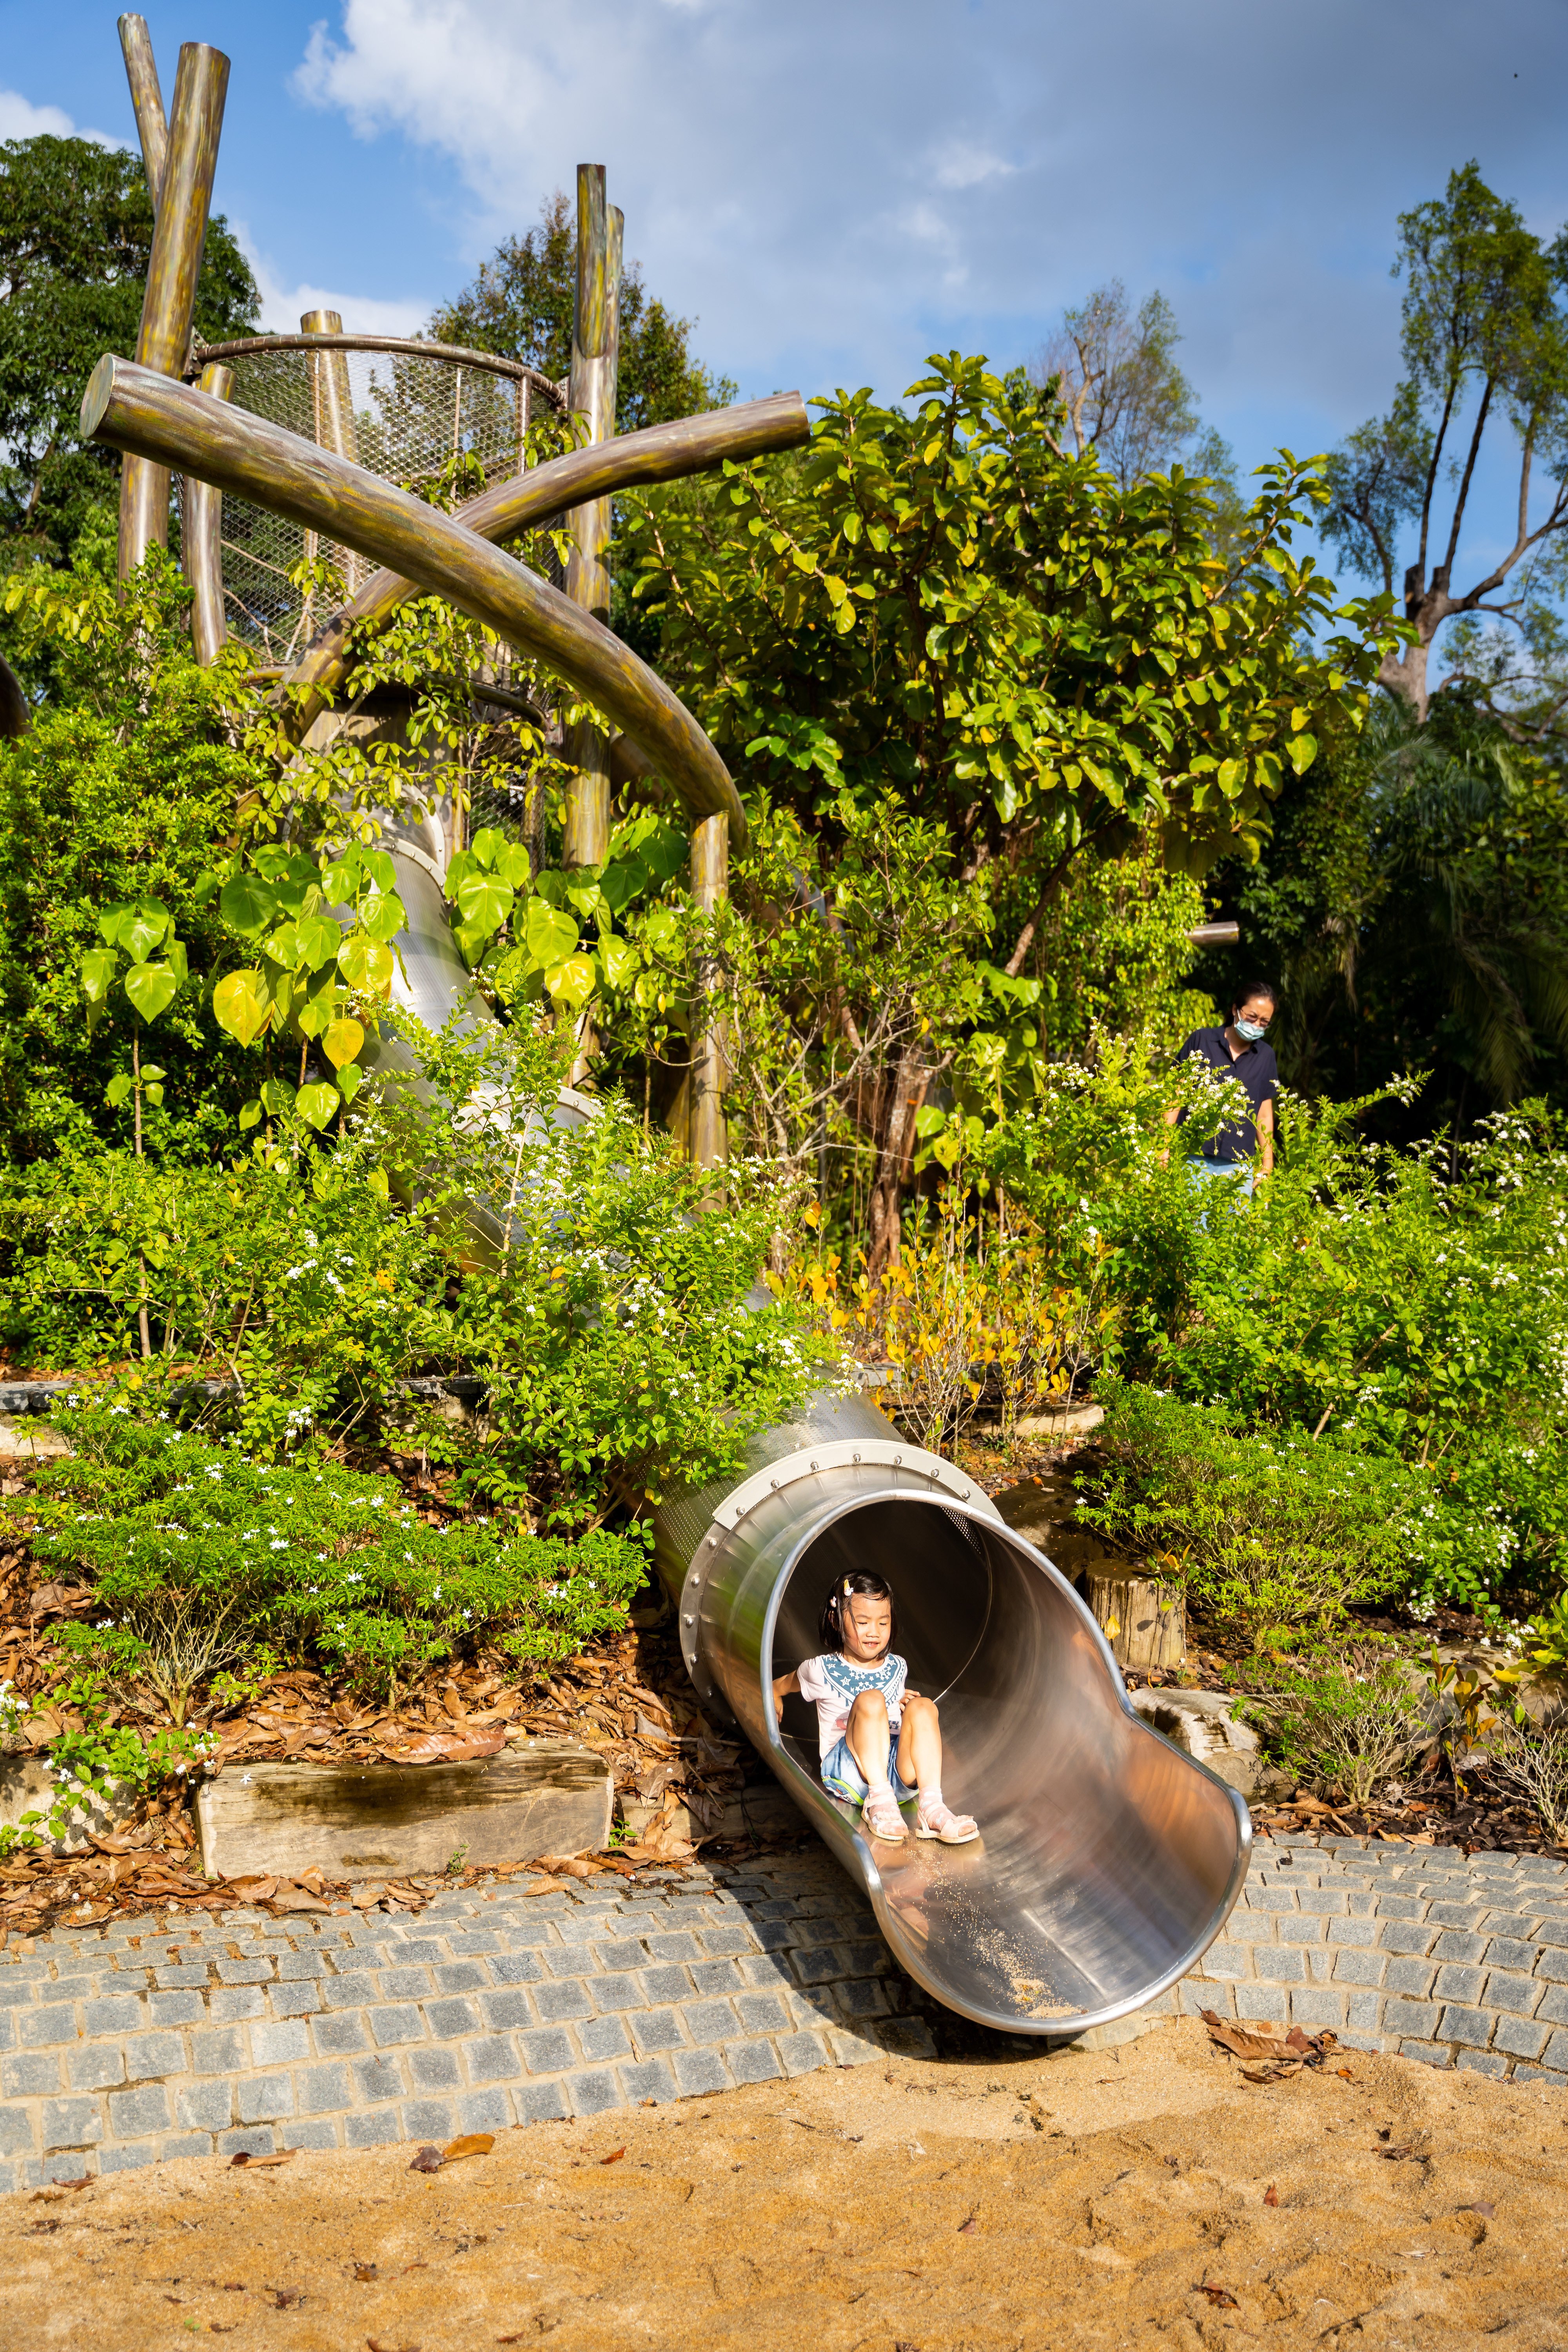 A  child plays on a slide the Como Adventure Grove, at the Singapore Botanic Gardens.&#xA;&#xA;CREDIT: National Parks Board, Singapore